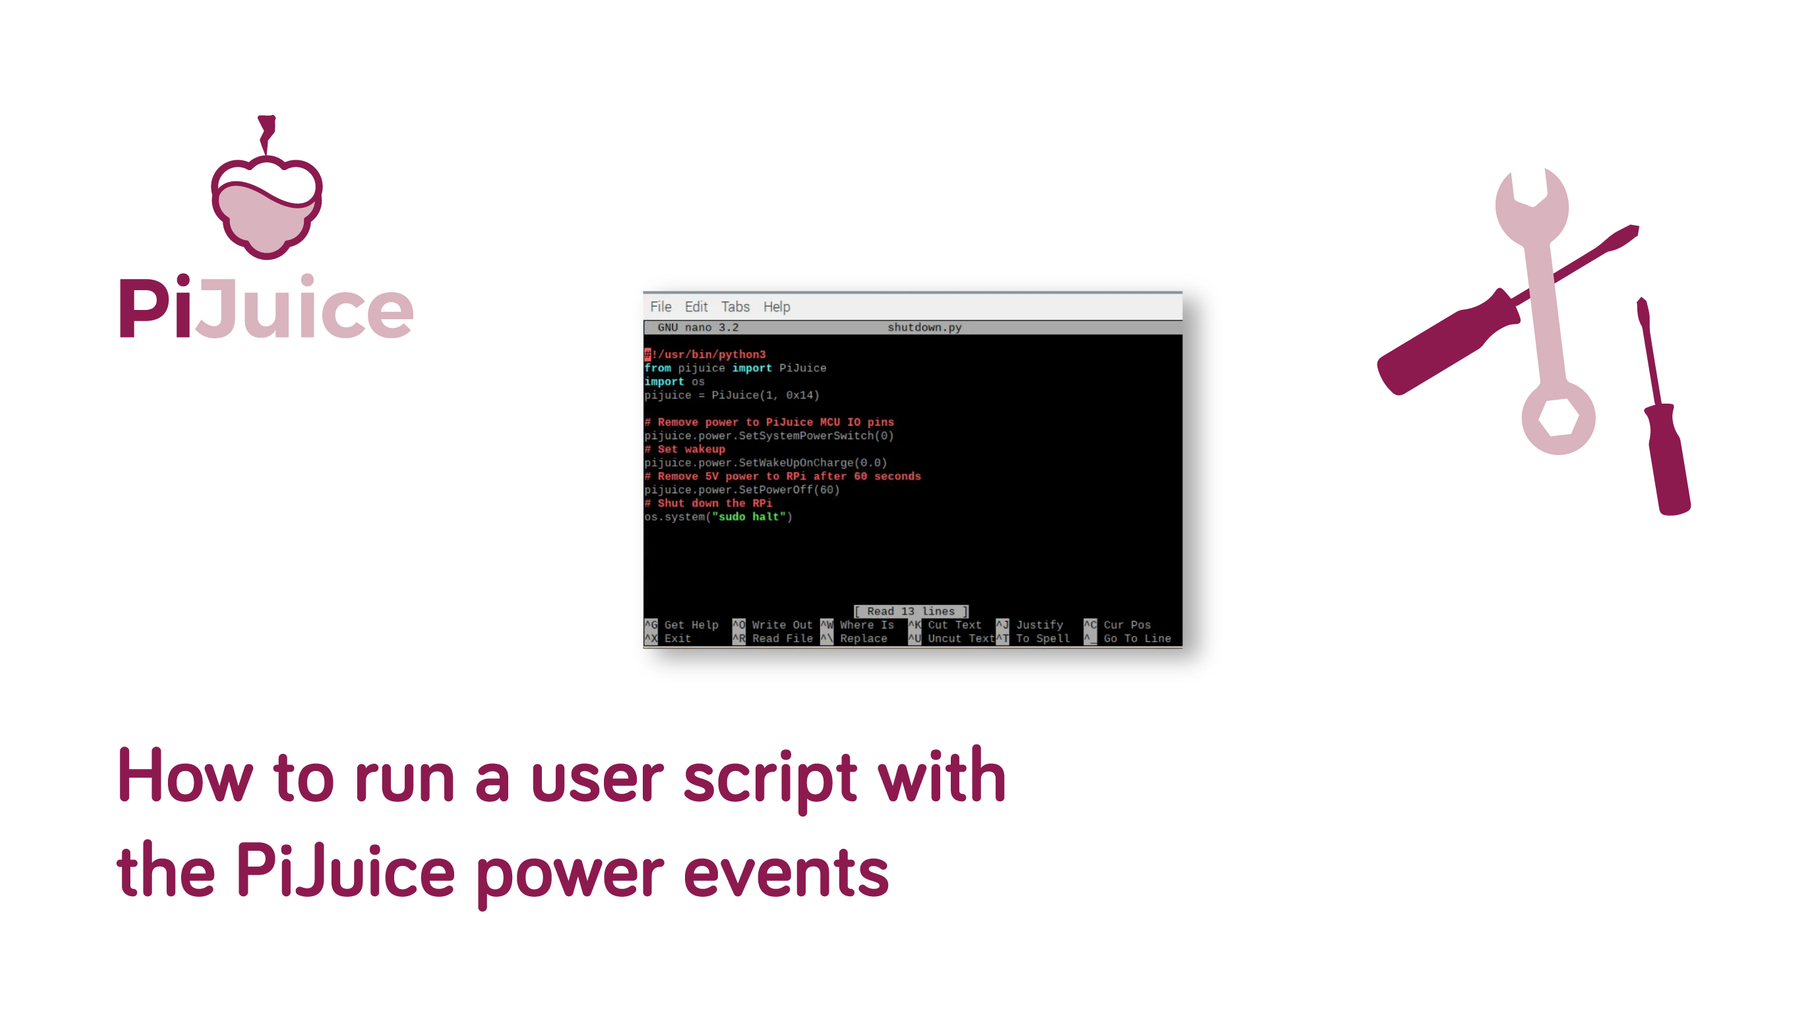 How to run a user script with the PiJuice power events